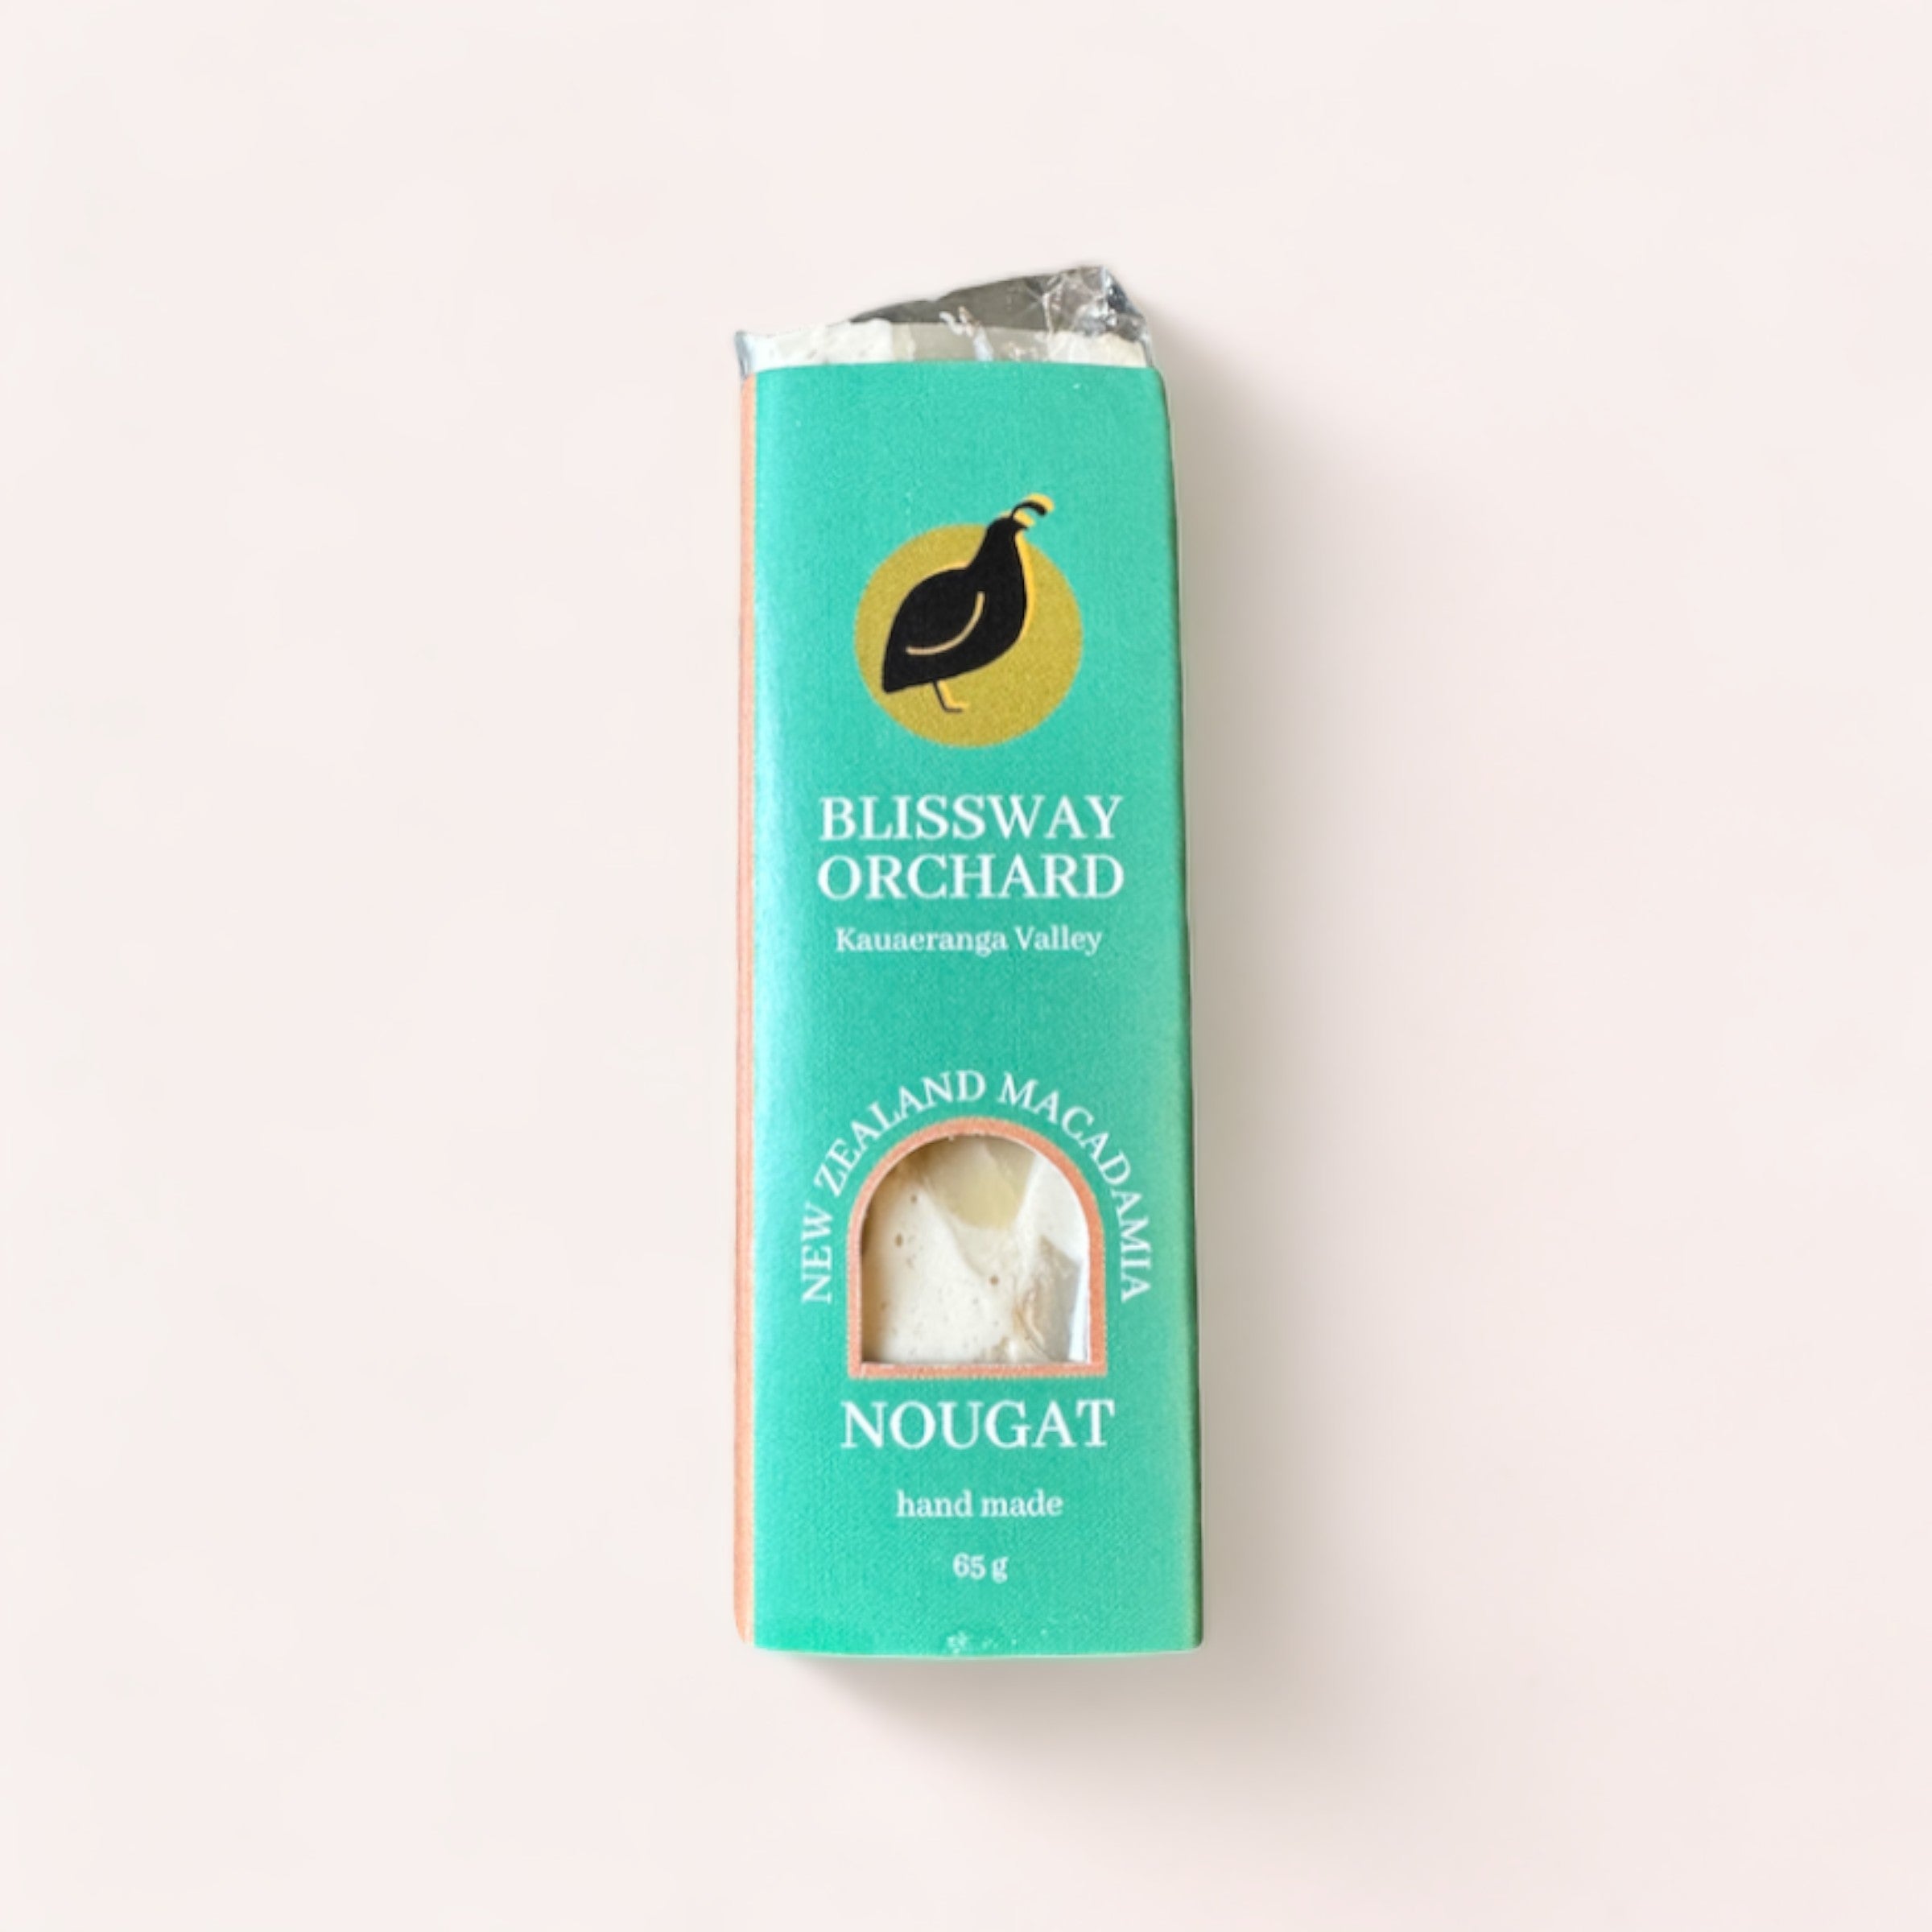 A wrapped bar of Macadamia Nougat by Blissway Orchard on a plain background.